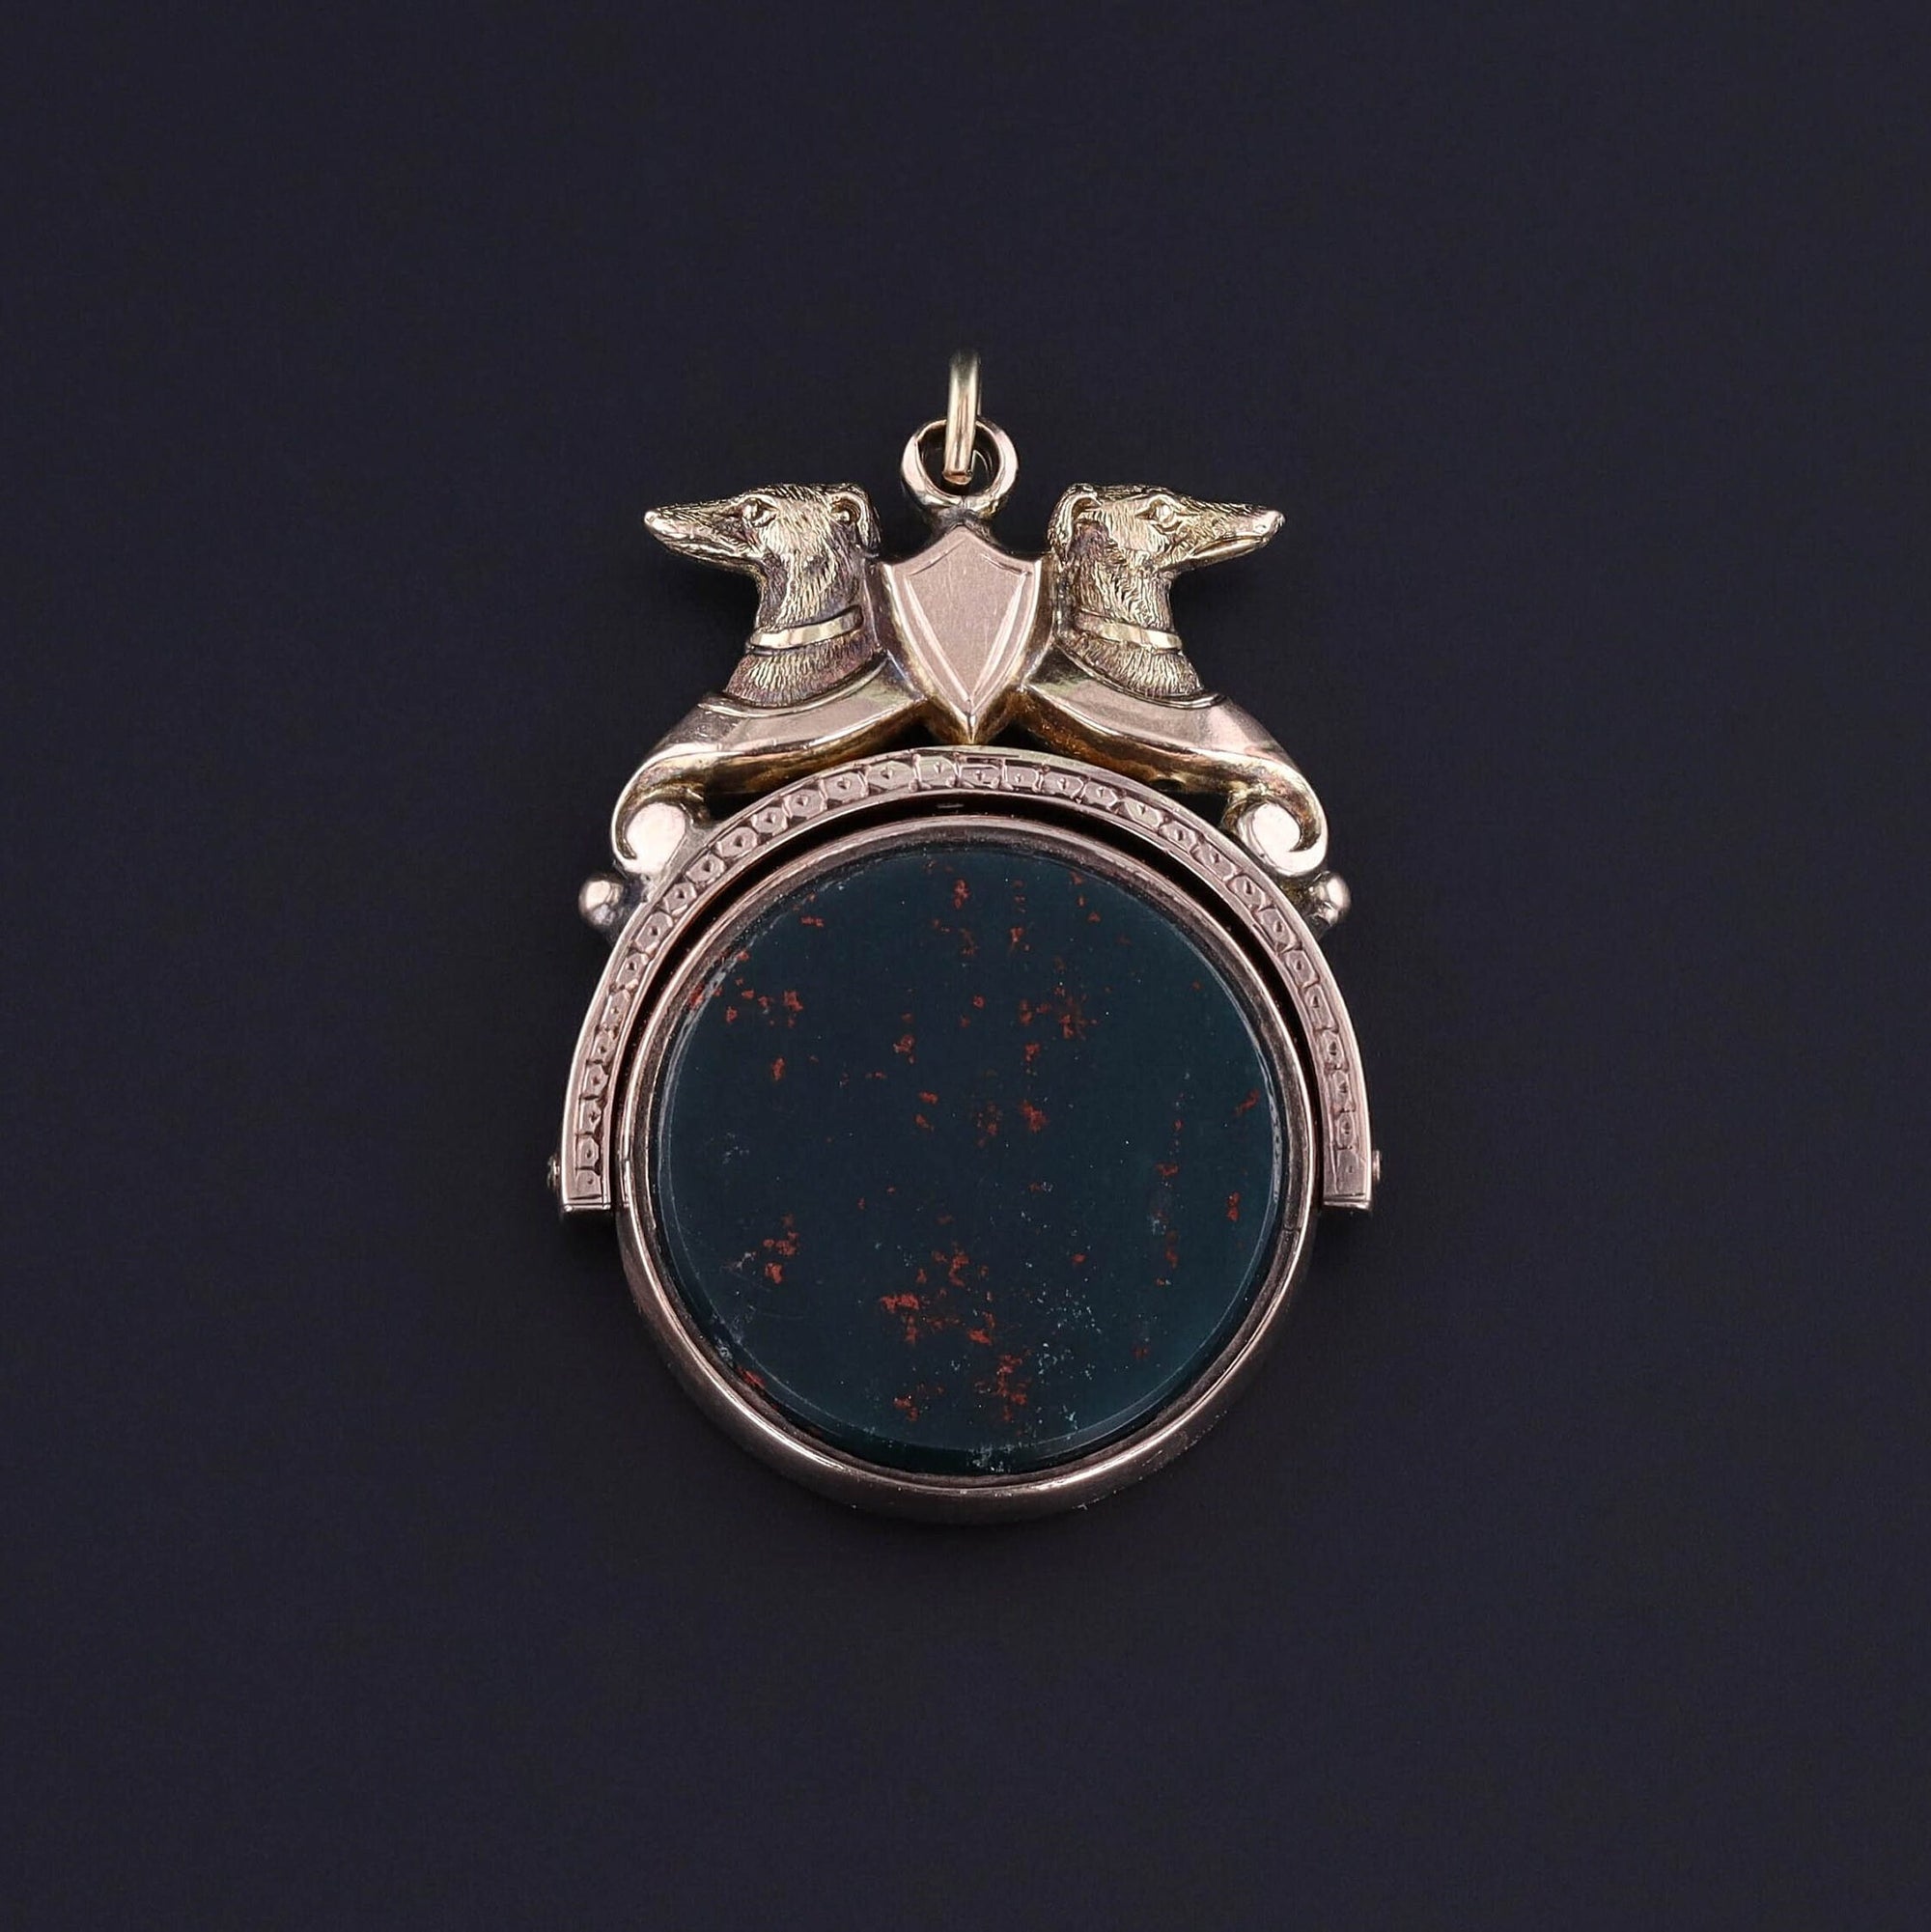 A Victorian era Greyhound dog pendant that flips to show a bloodstone on one side and a carnelian on the other. Perfect for anyone with a love of greyhounds or any antique jewelry collector.